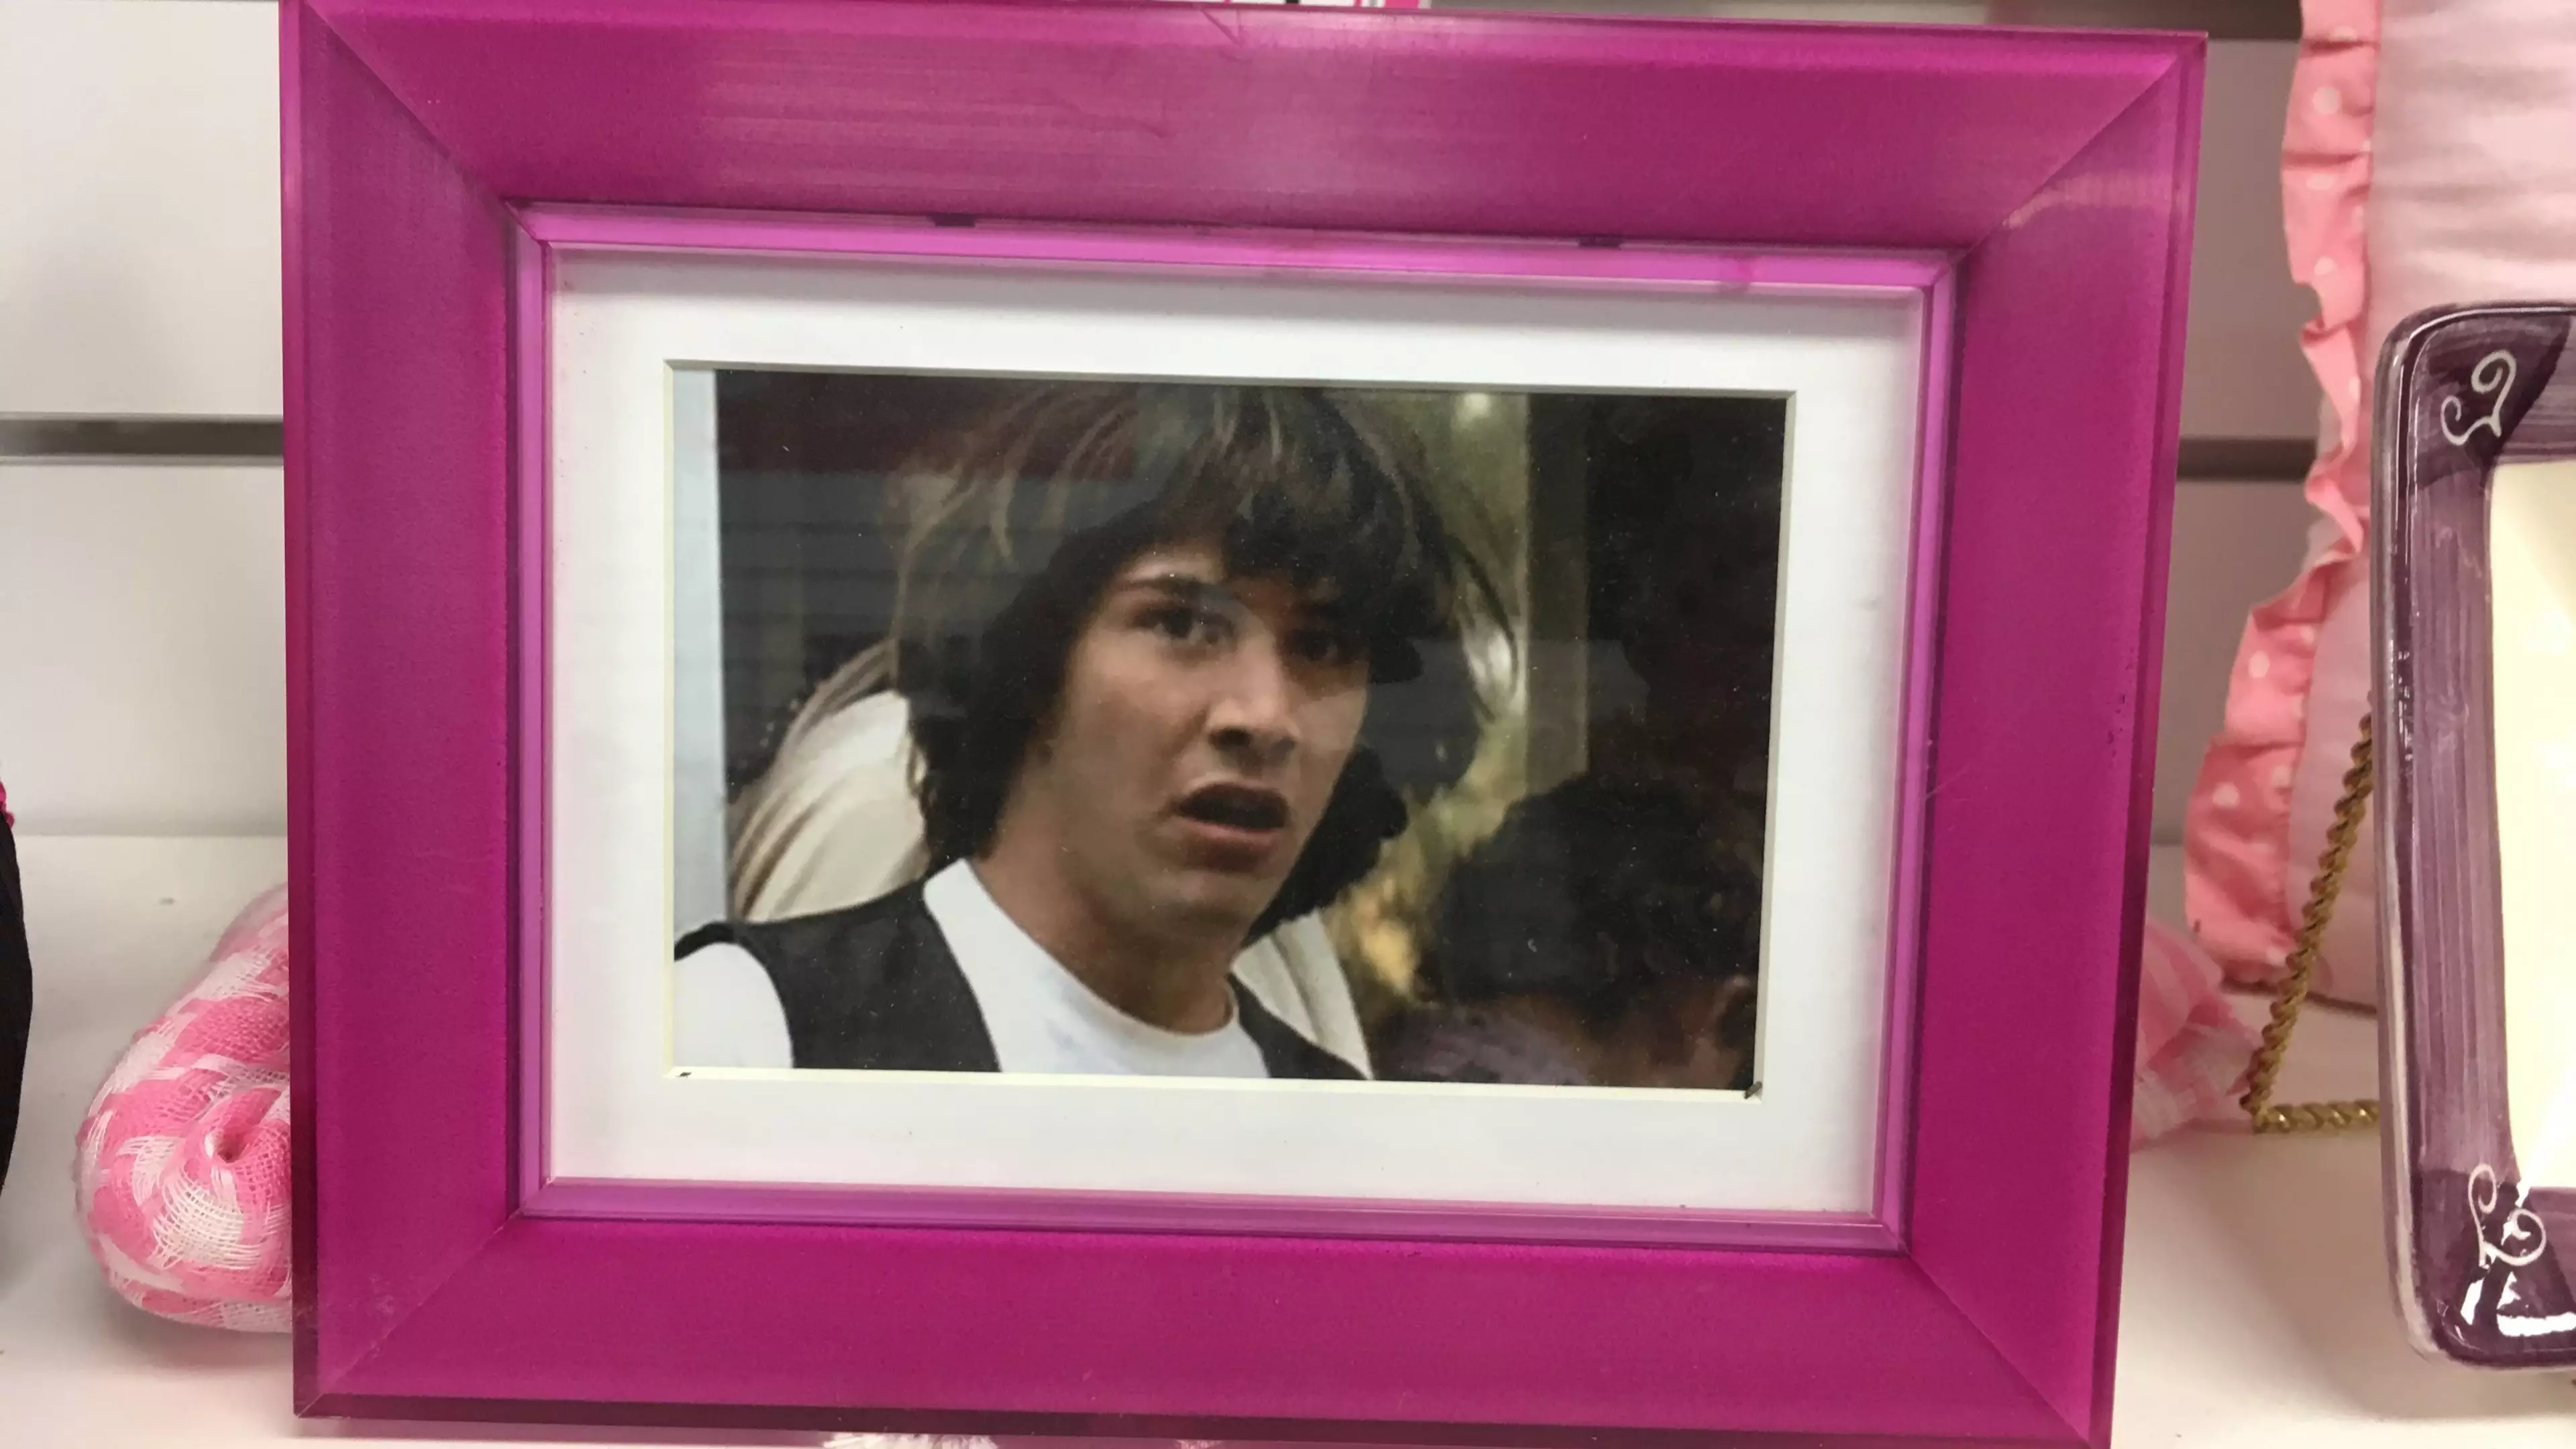 Aussie Op Shop Is Using Pictures Of Keanu Reeves To Spice Up Business